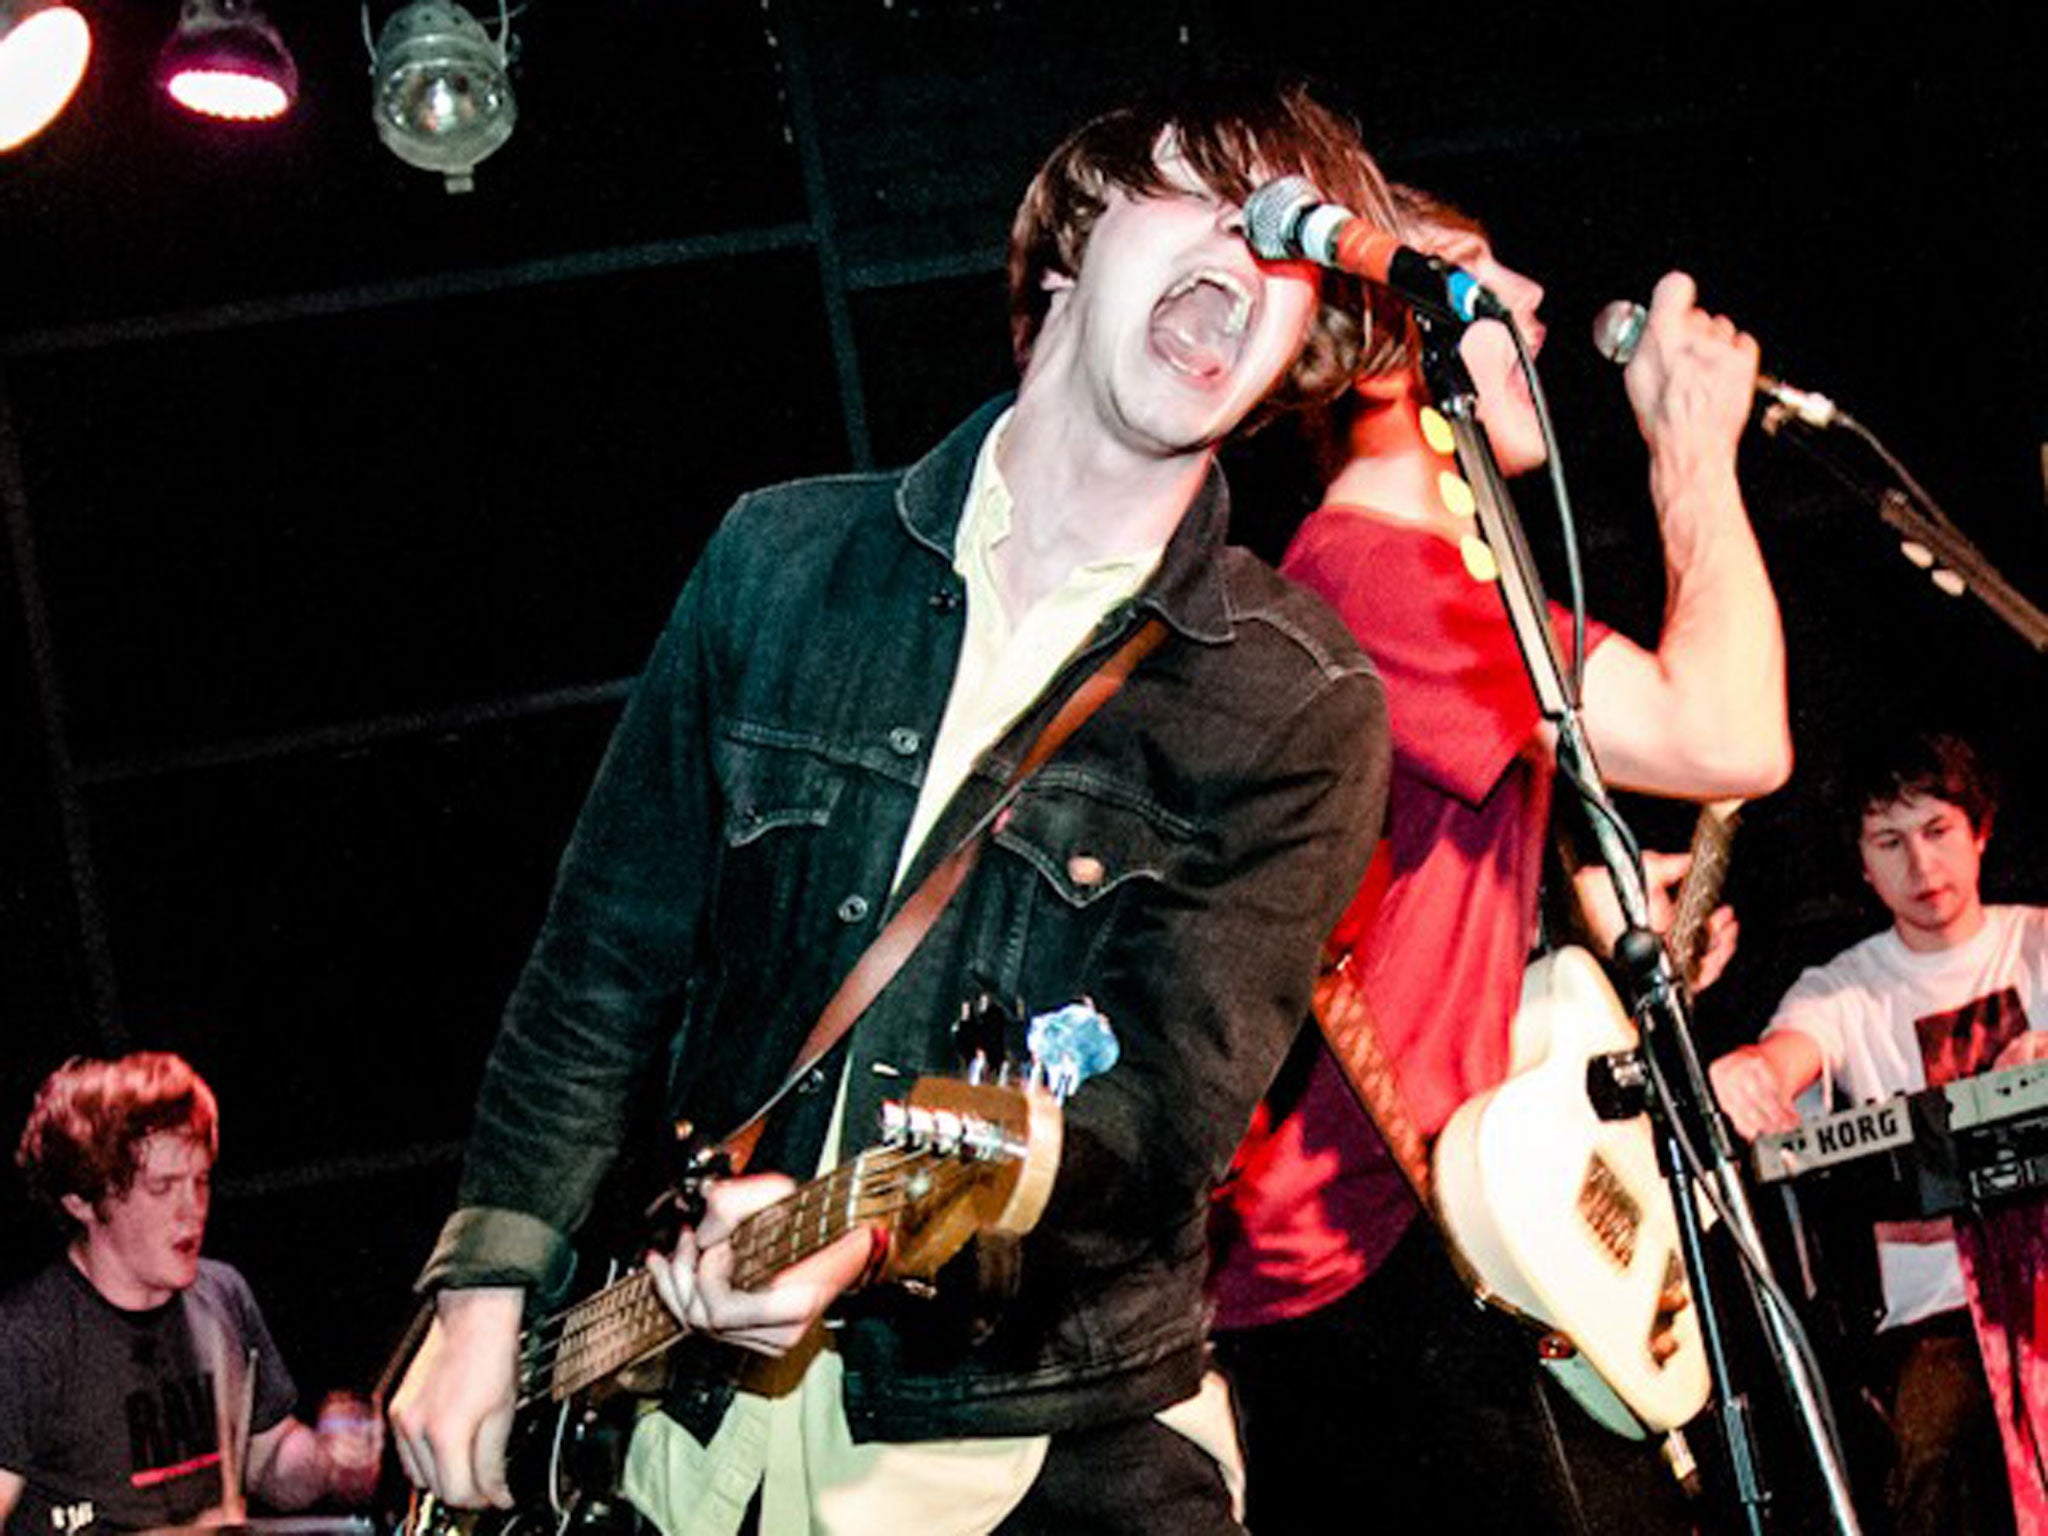 Chilli Jesson and Sam Fryer of Palma Violets, who play melodic rock’n’roll with big singalong bits